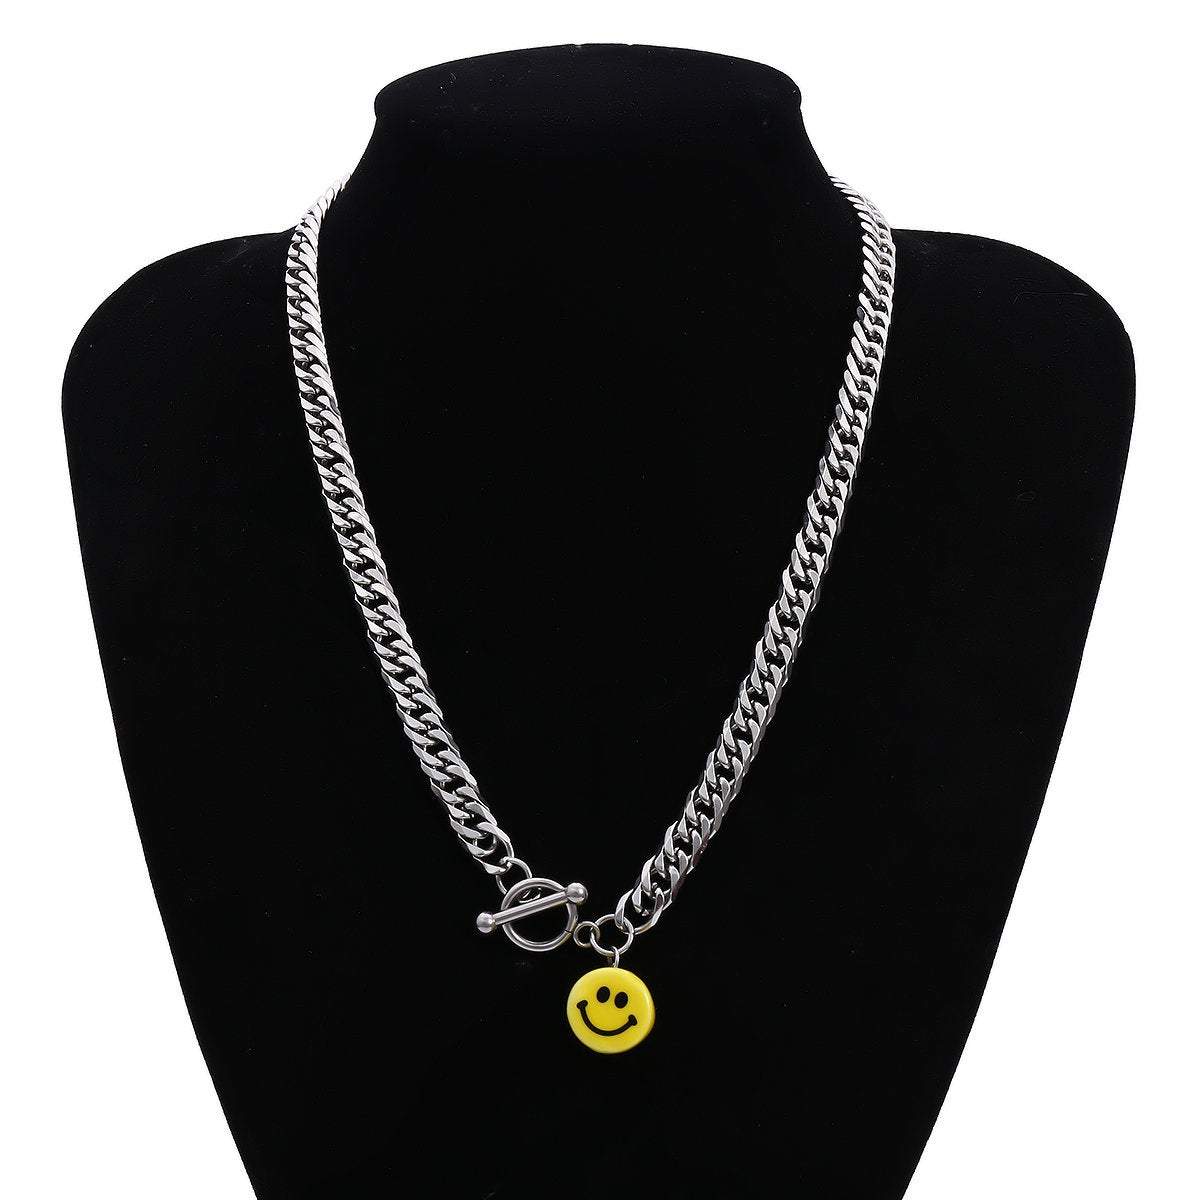 Stainless Steel Smile Face Toggle Clasp Curb Link Chain Necklace - ArtGalleryZen